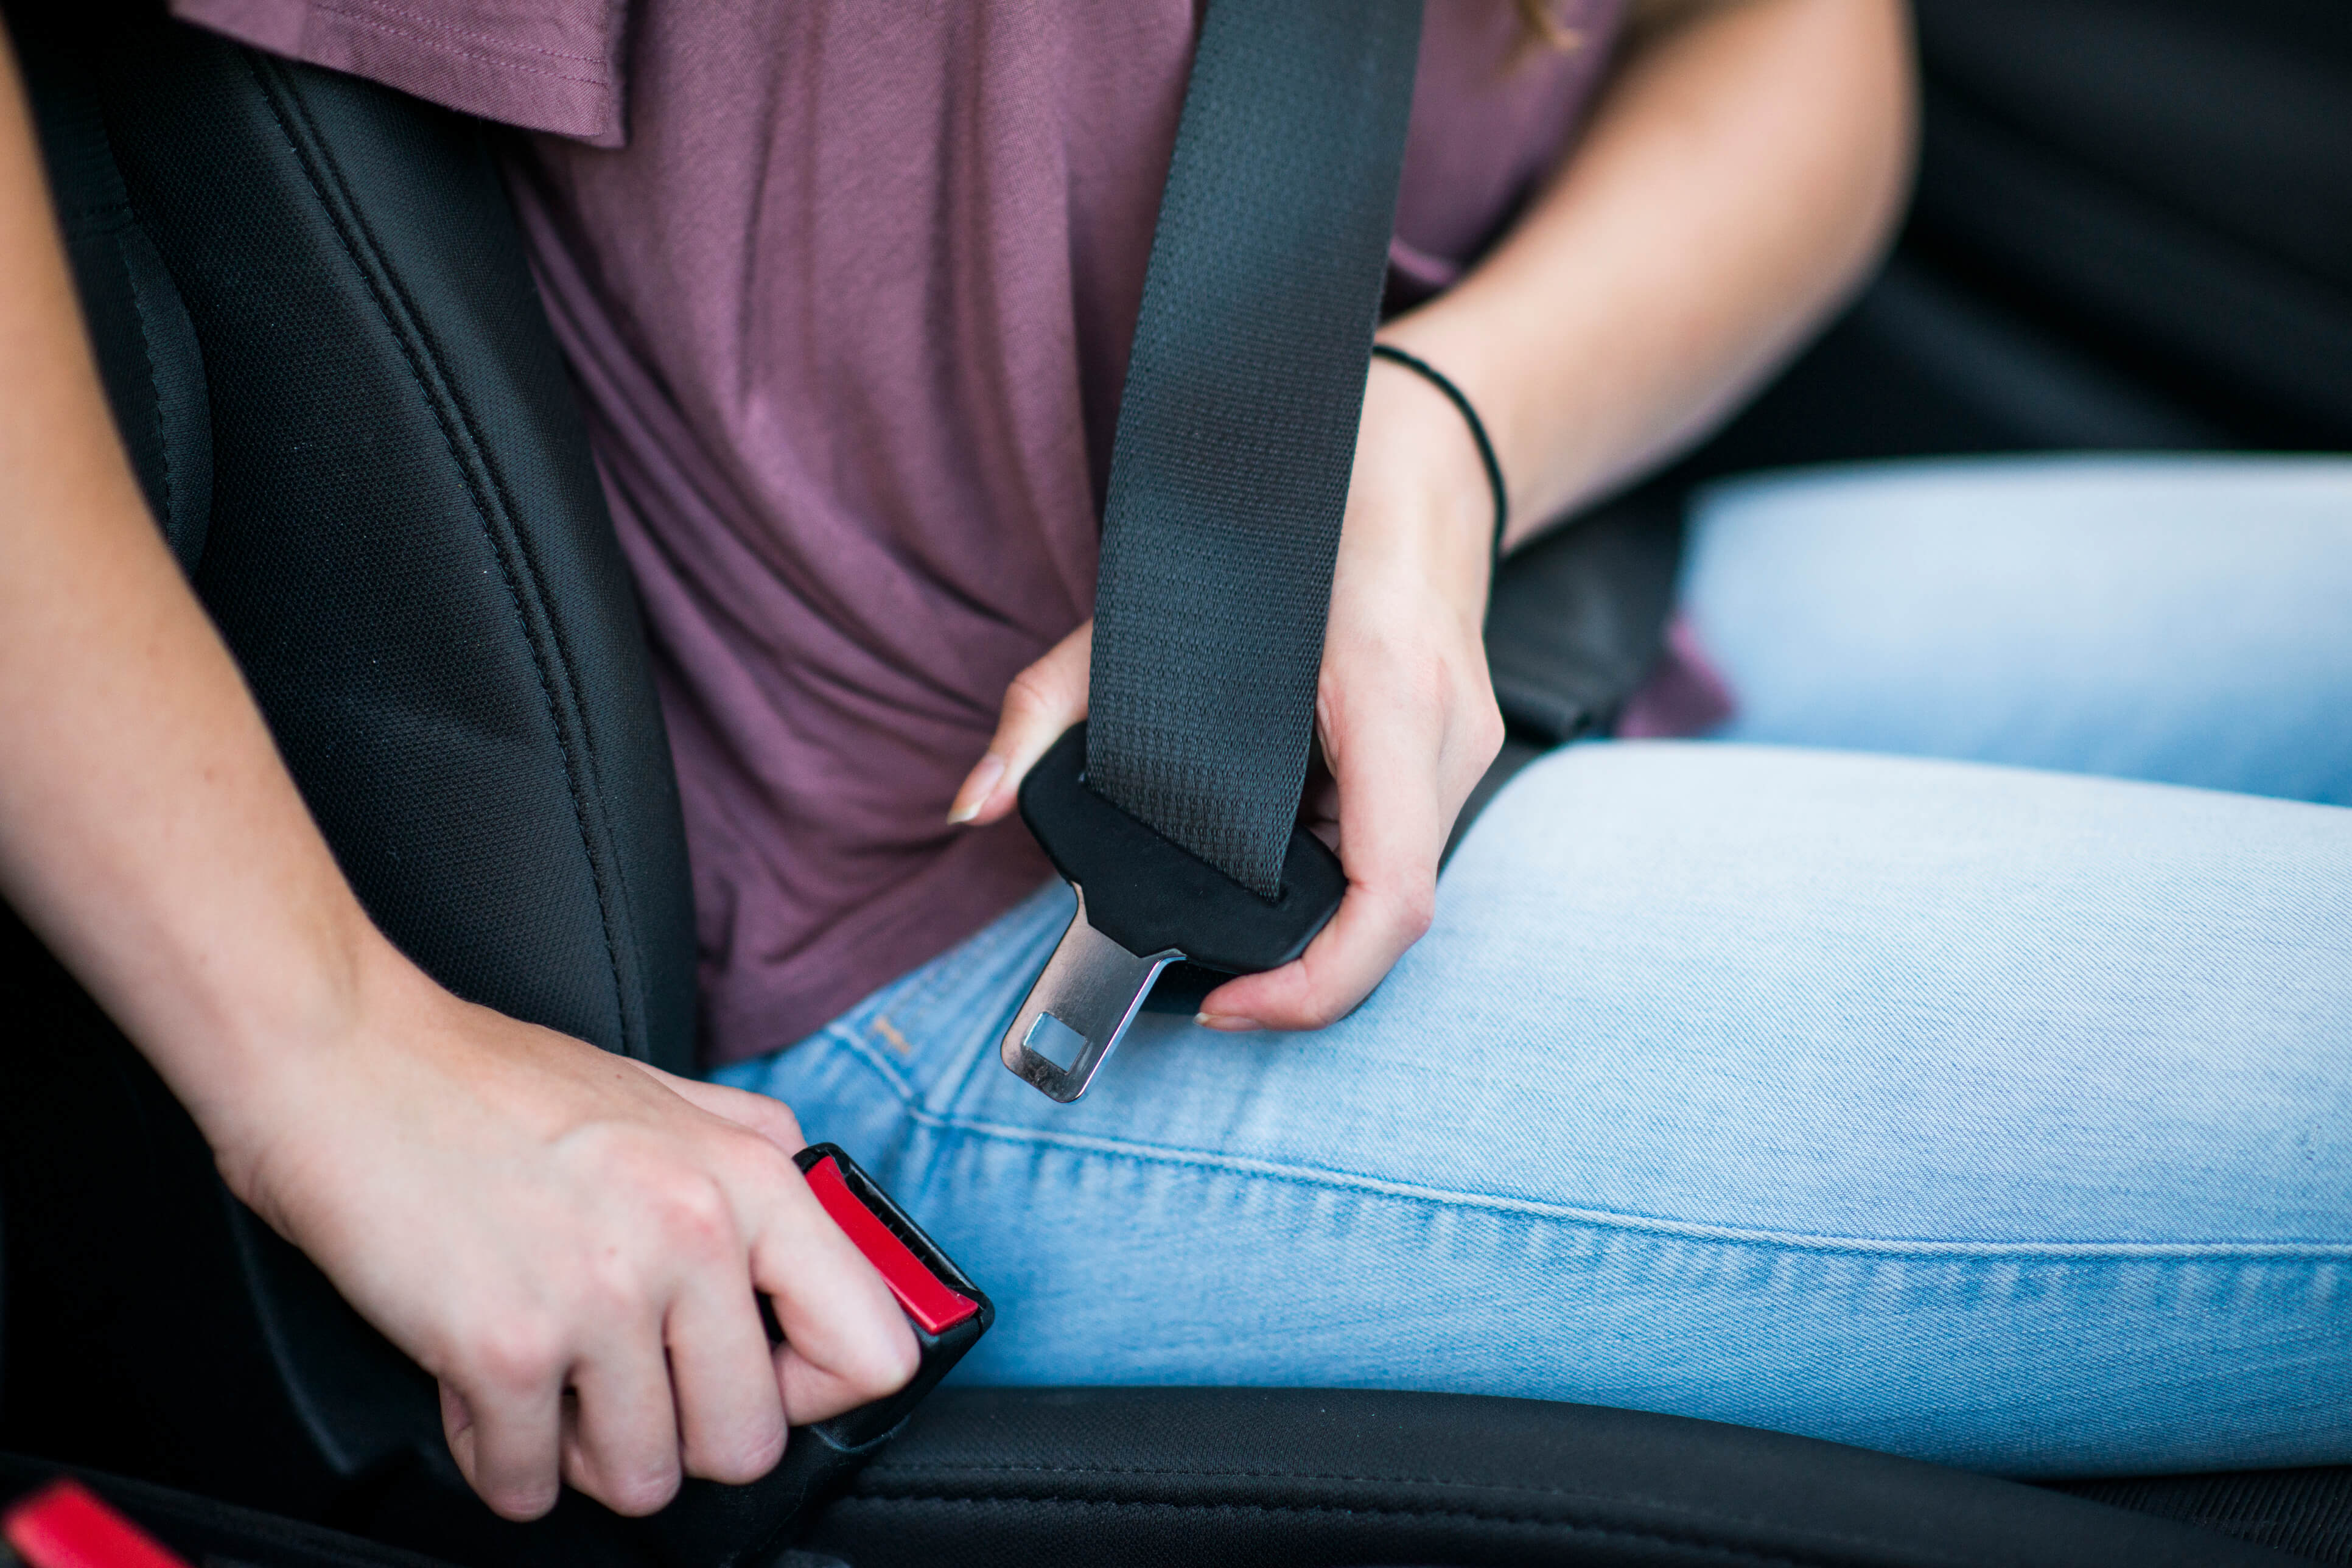 Importance Of Seat Belt - Safety Belts and The Seat Belt Law / When seat belts were invented, they were put into every vehicle to keep people from flying out a window when involved in a wreck.